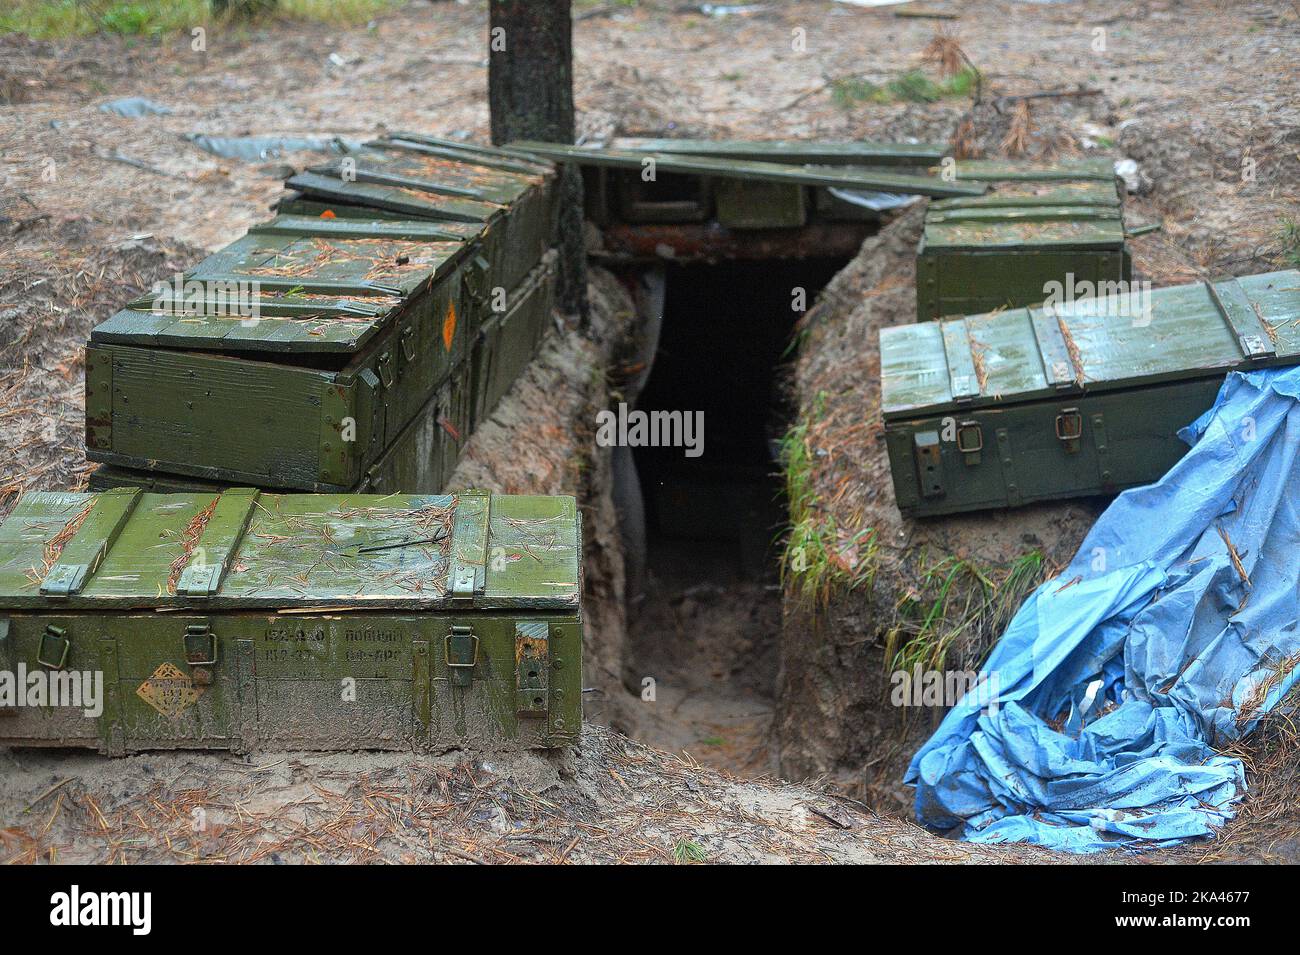 KHARKIV REGION, UKRAINE - OCTOBER 26, 2022 - Ammunition boxes line the stairs leading into a dugout in a forest near Izium after the liberation of the Stock Photo